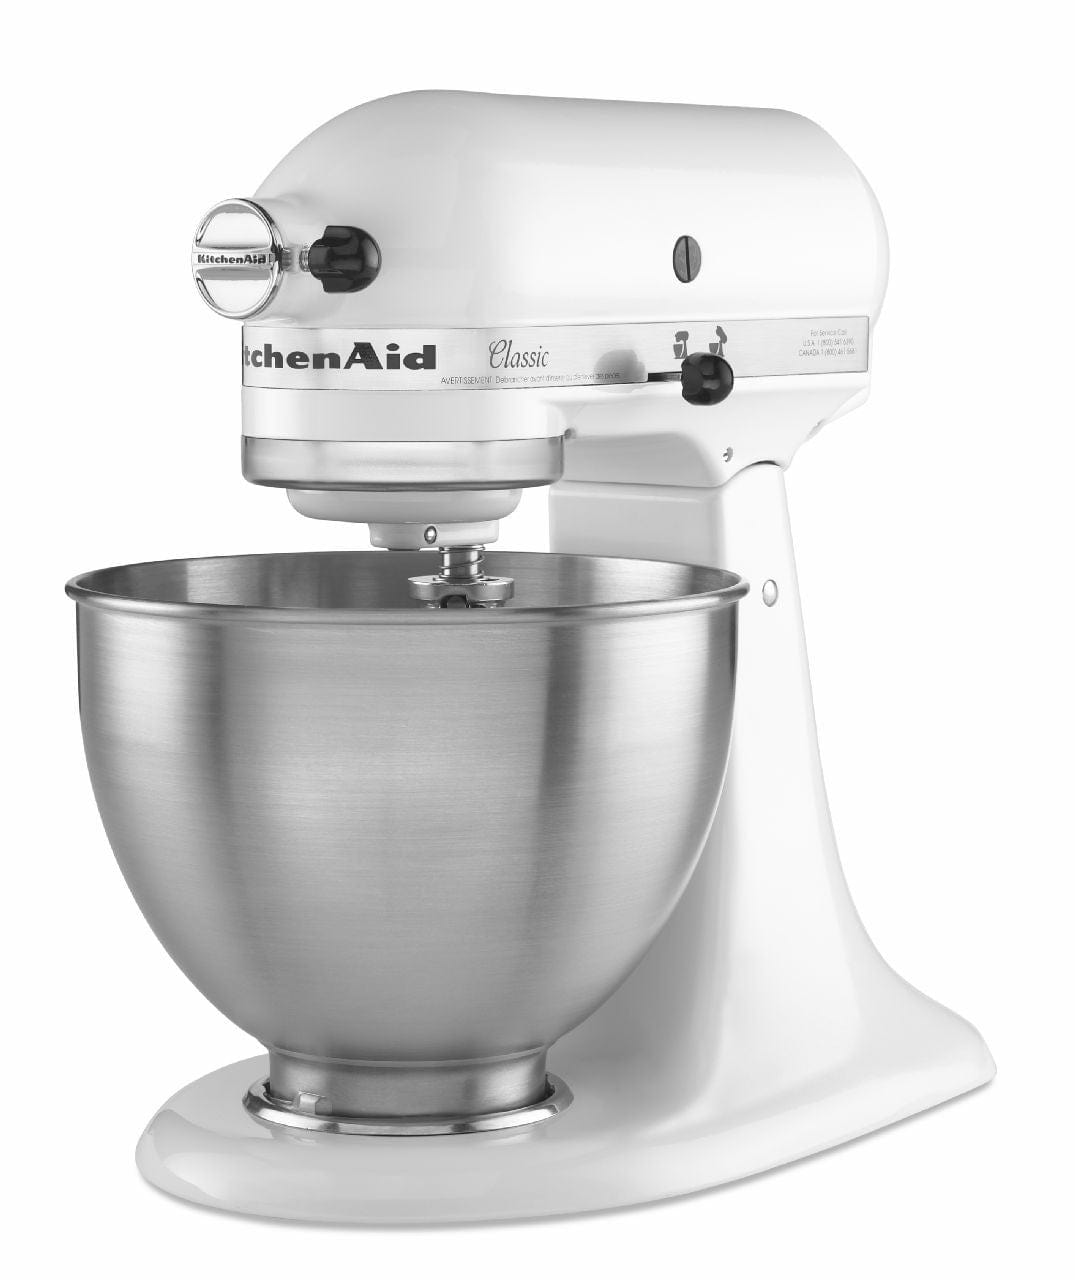 The Latest Kitchenaid 7 Qt Bowl-Lift Stand Mixer with Resdesigned Pemium  Touch Points KSM70KSM70SK Stainless Steel Tools KitchenAid is Now Available  at Amazing Prices